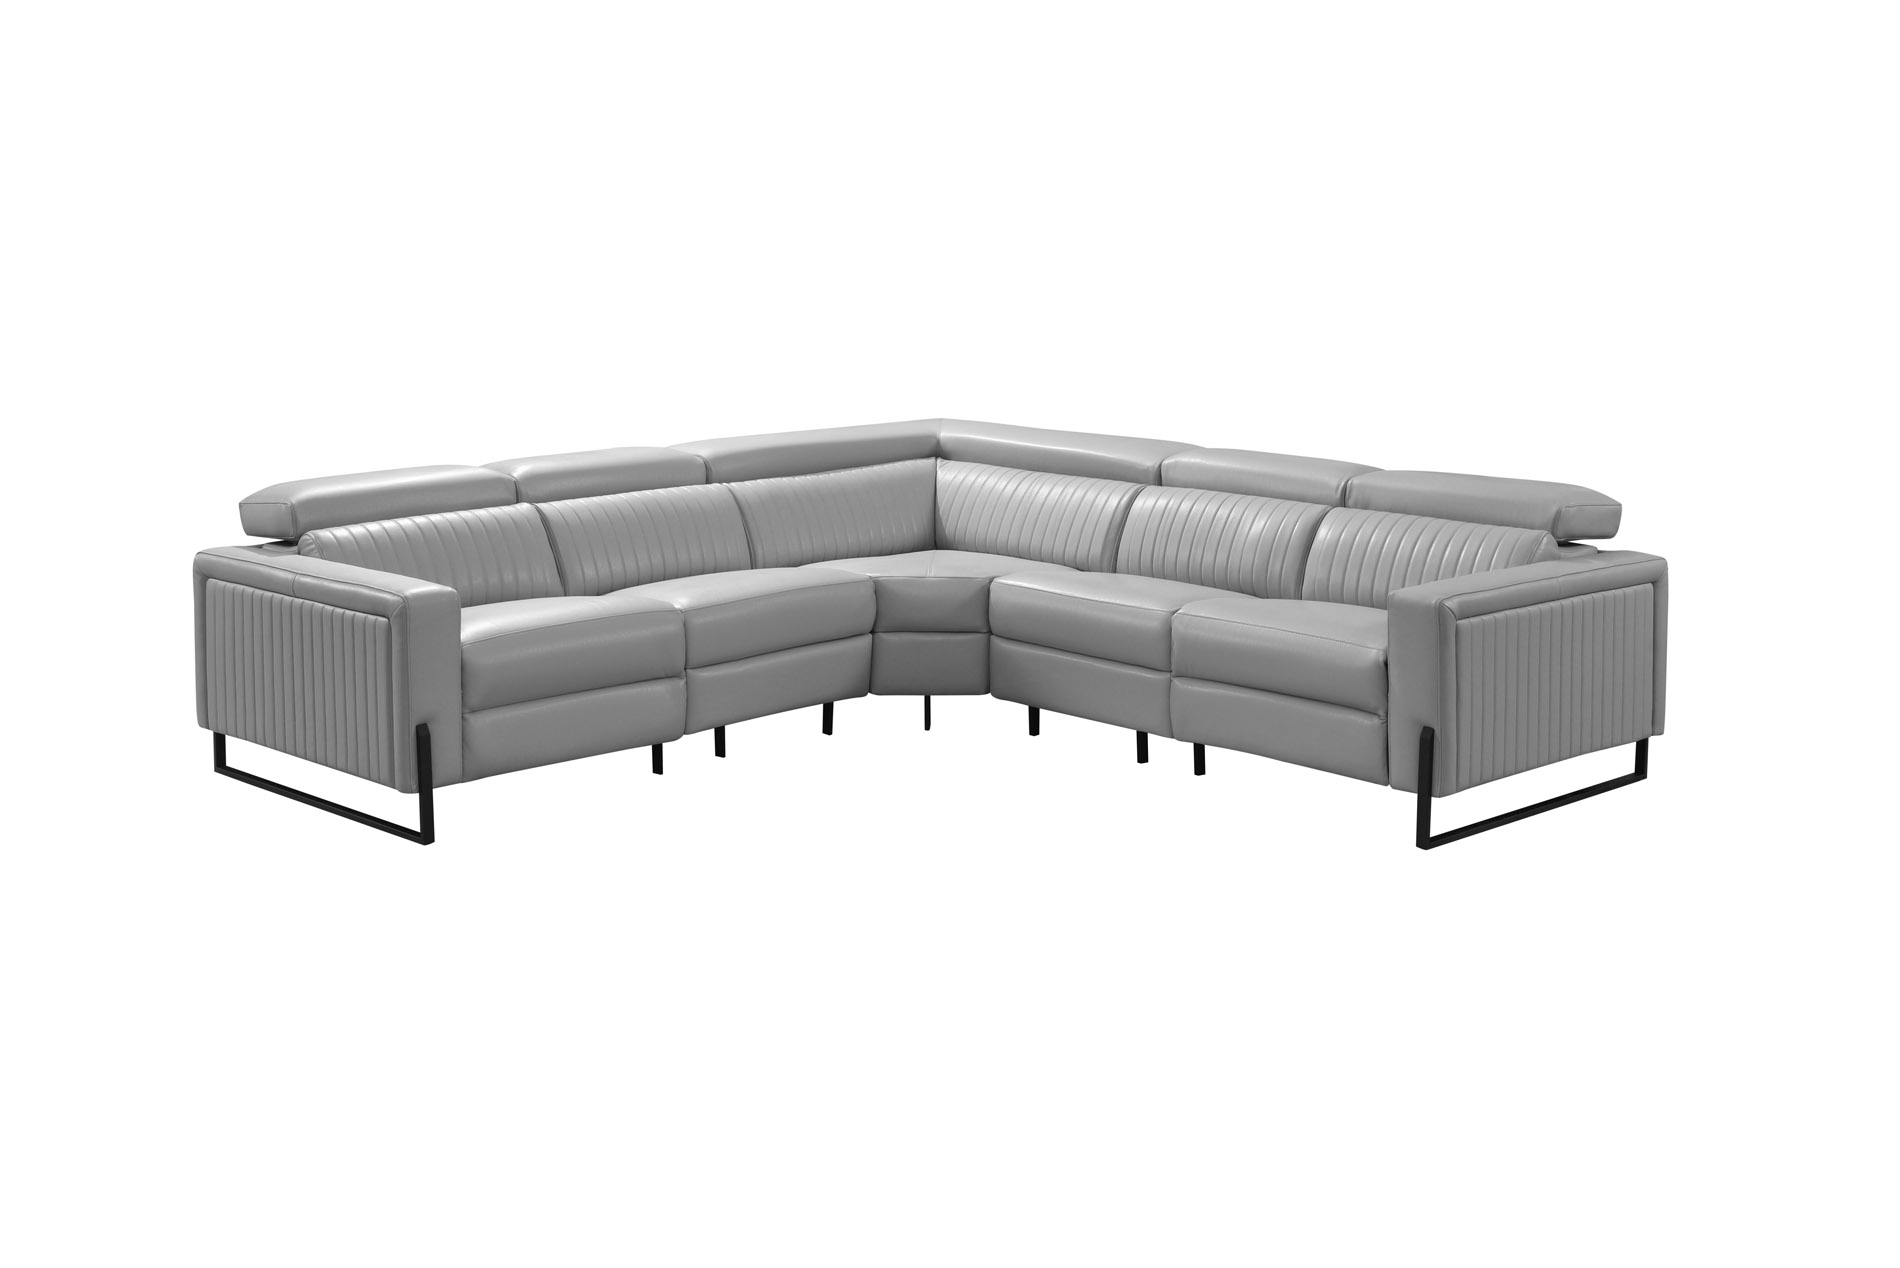 Adjustable Advanced Genuine Leather Sectional